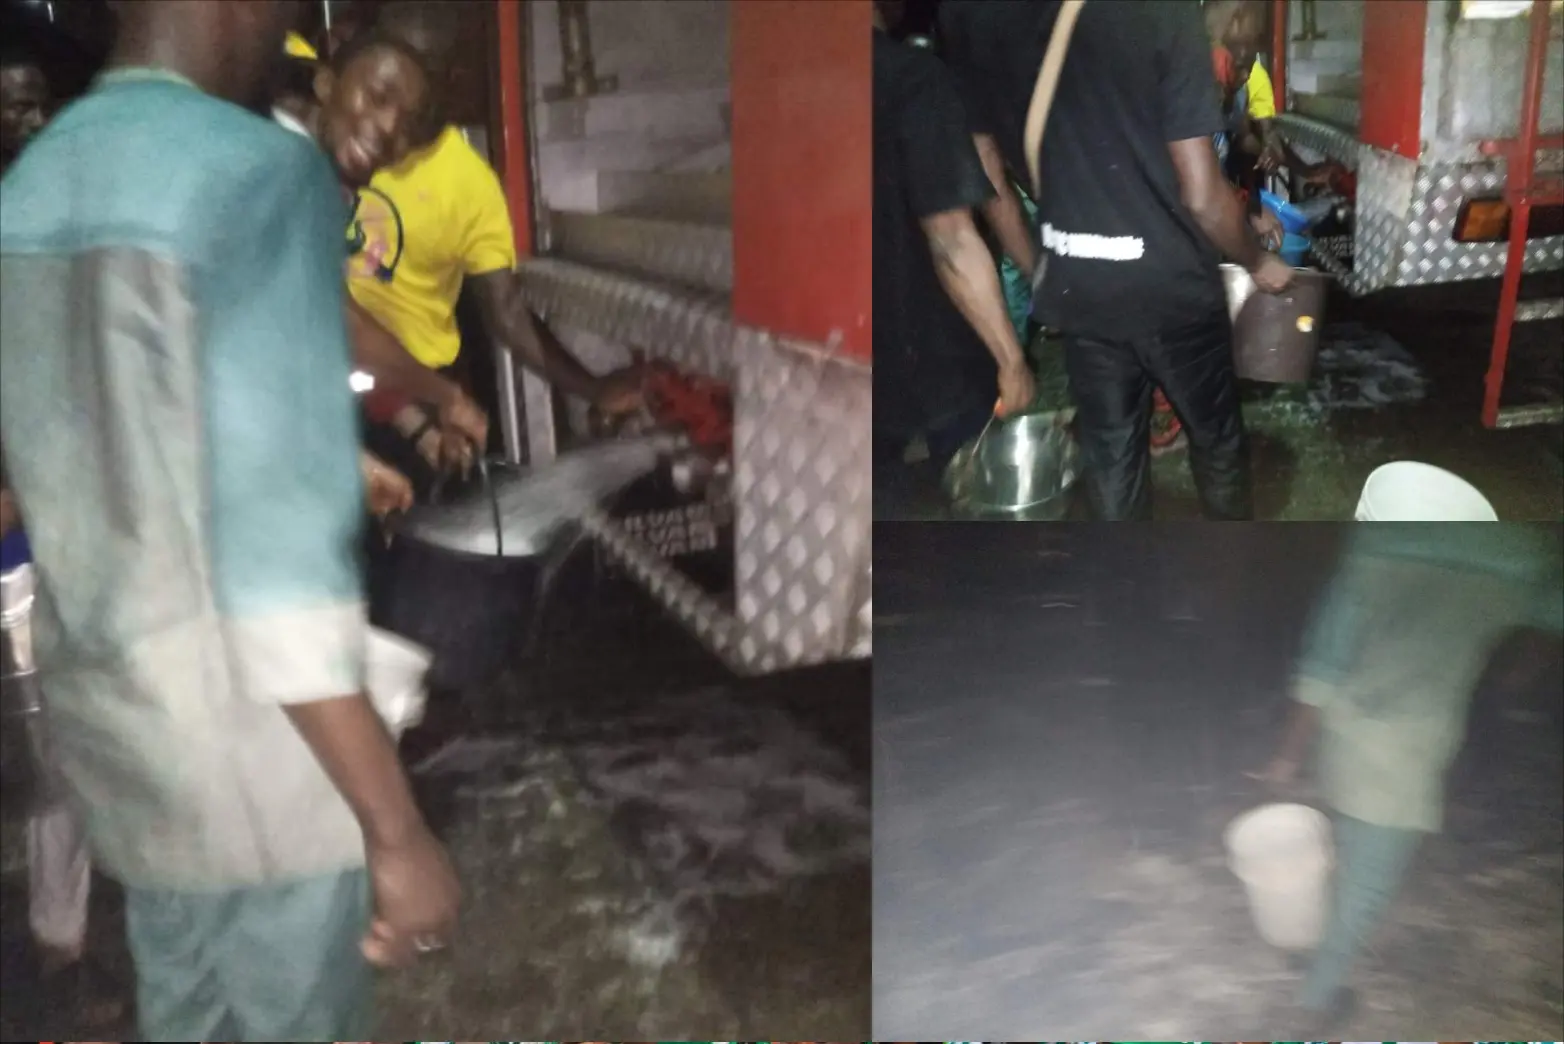 UNICAL Fire: Fire Service came with moving borehole without hose - Students